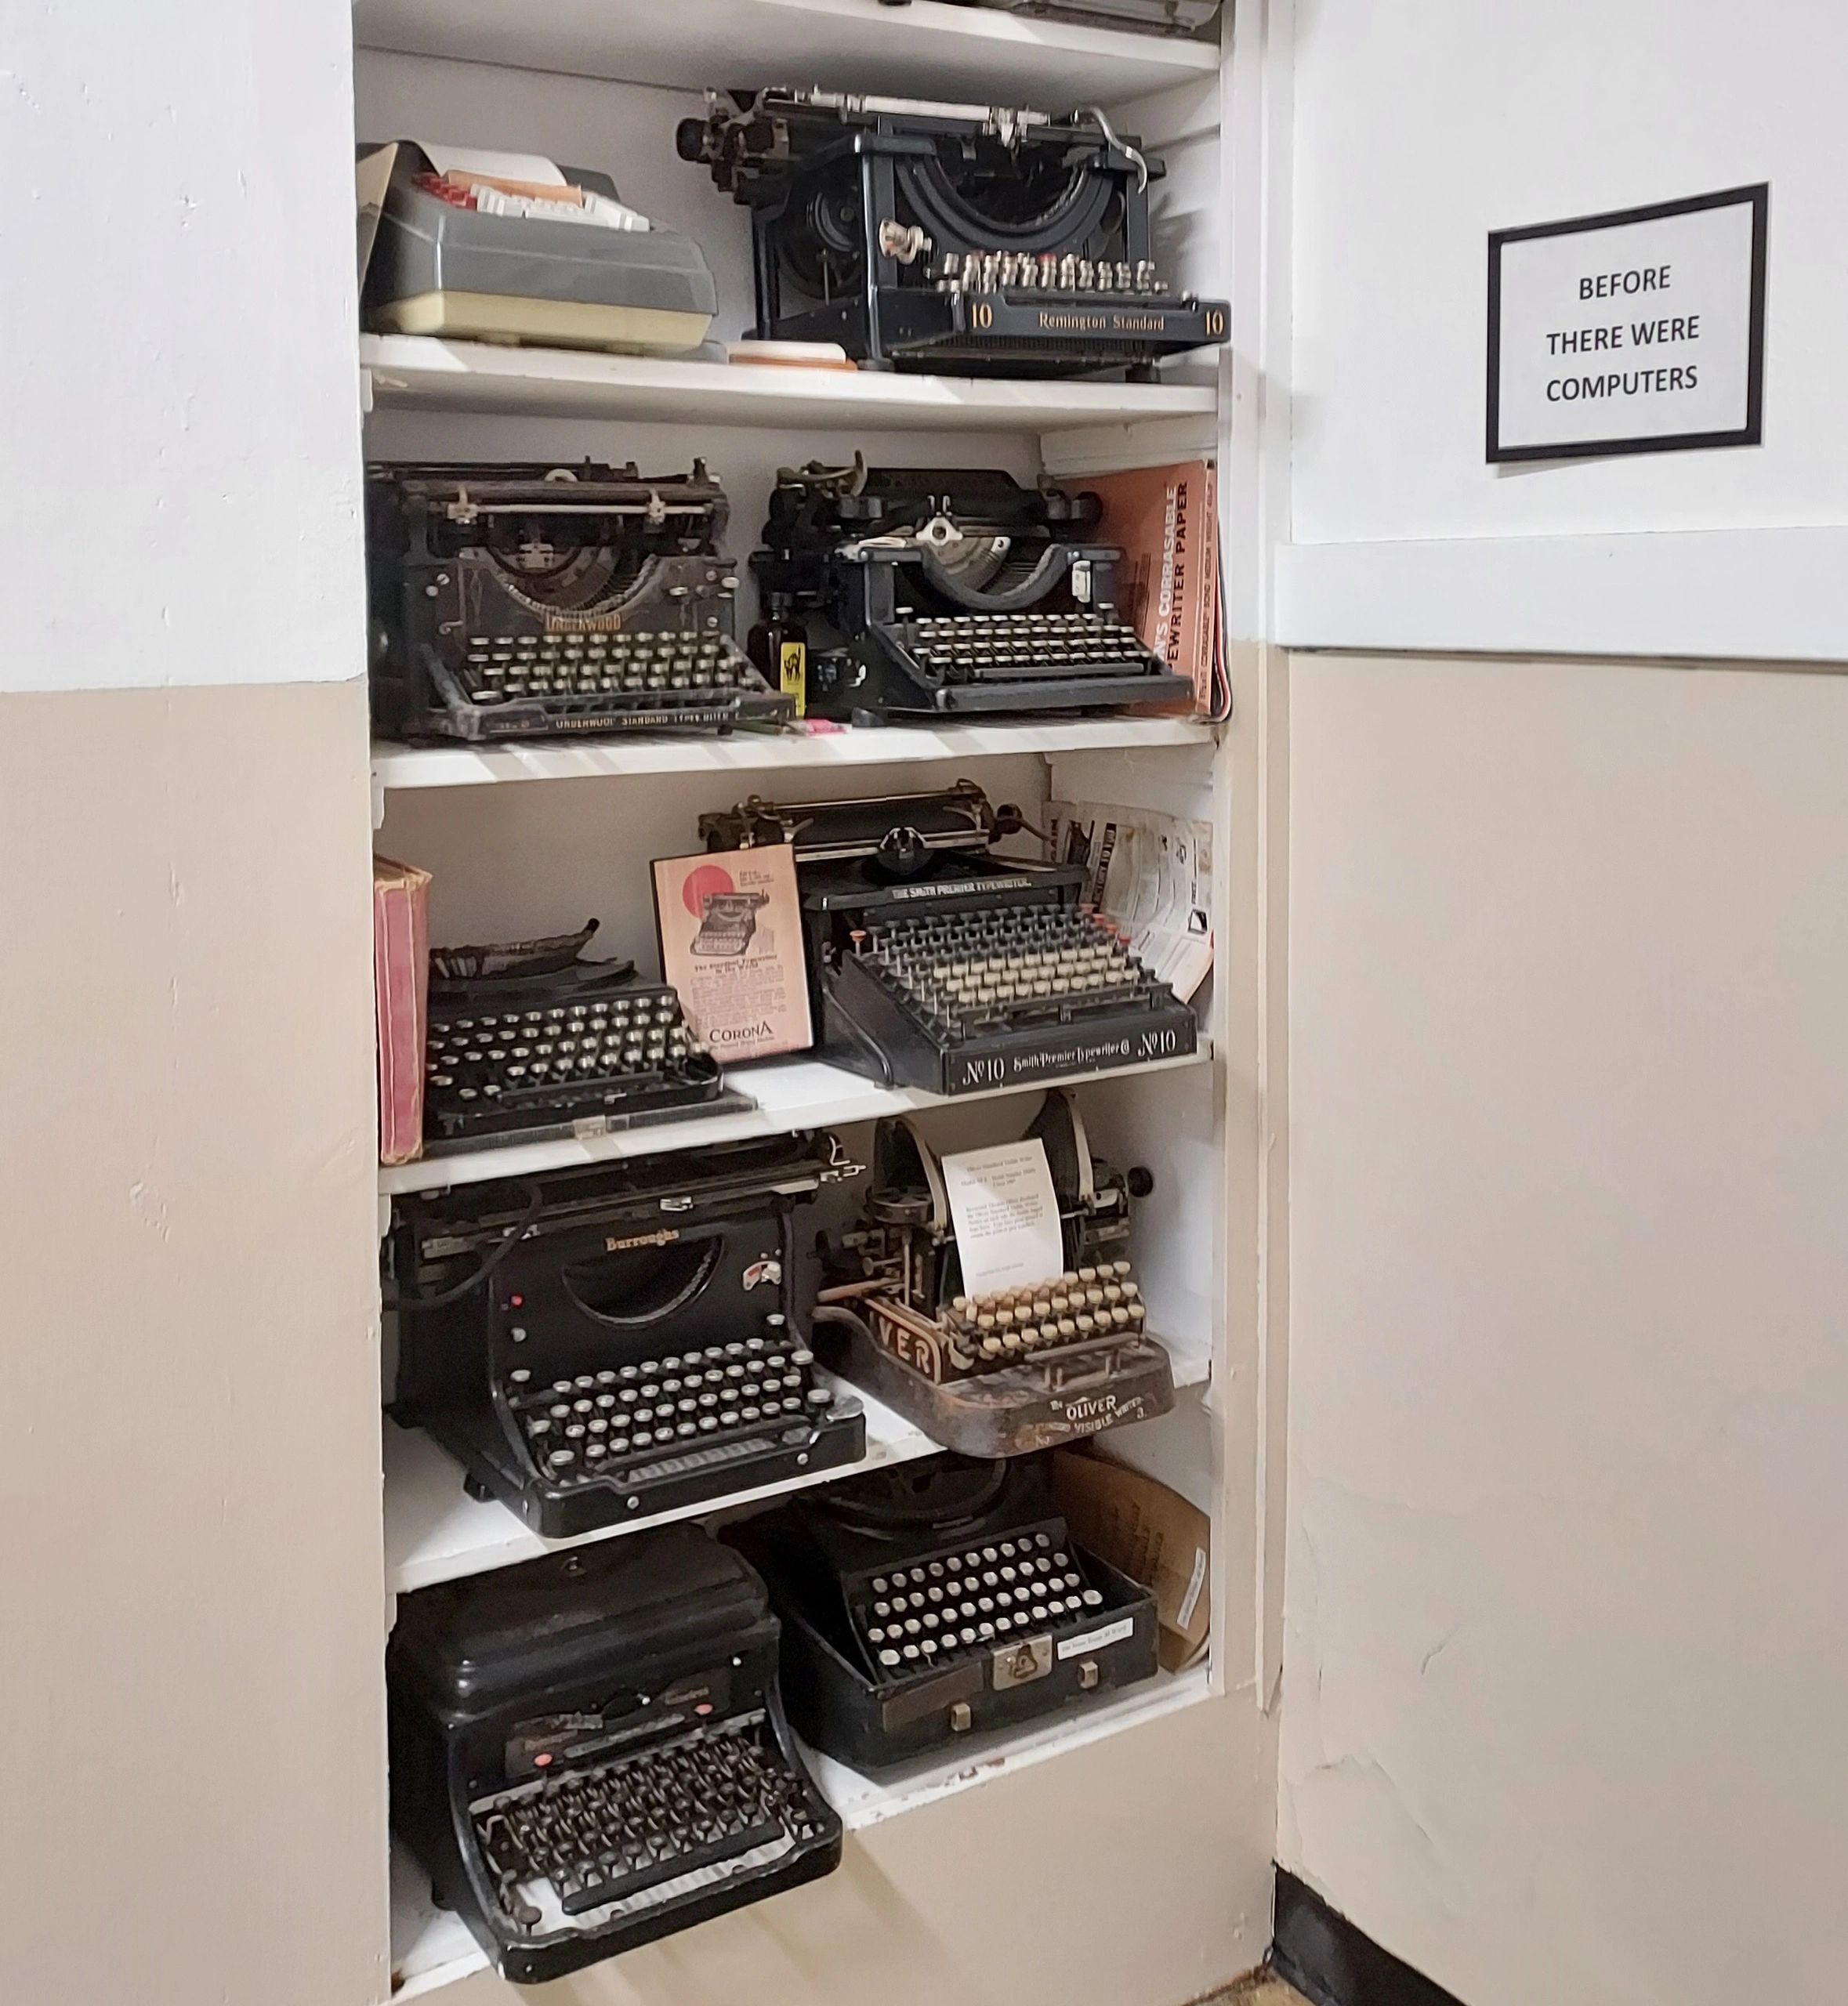 Typewriter - An Ordinary Machine Which Made Journalism And Typing